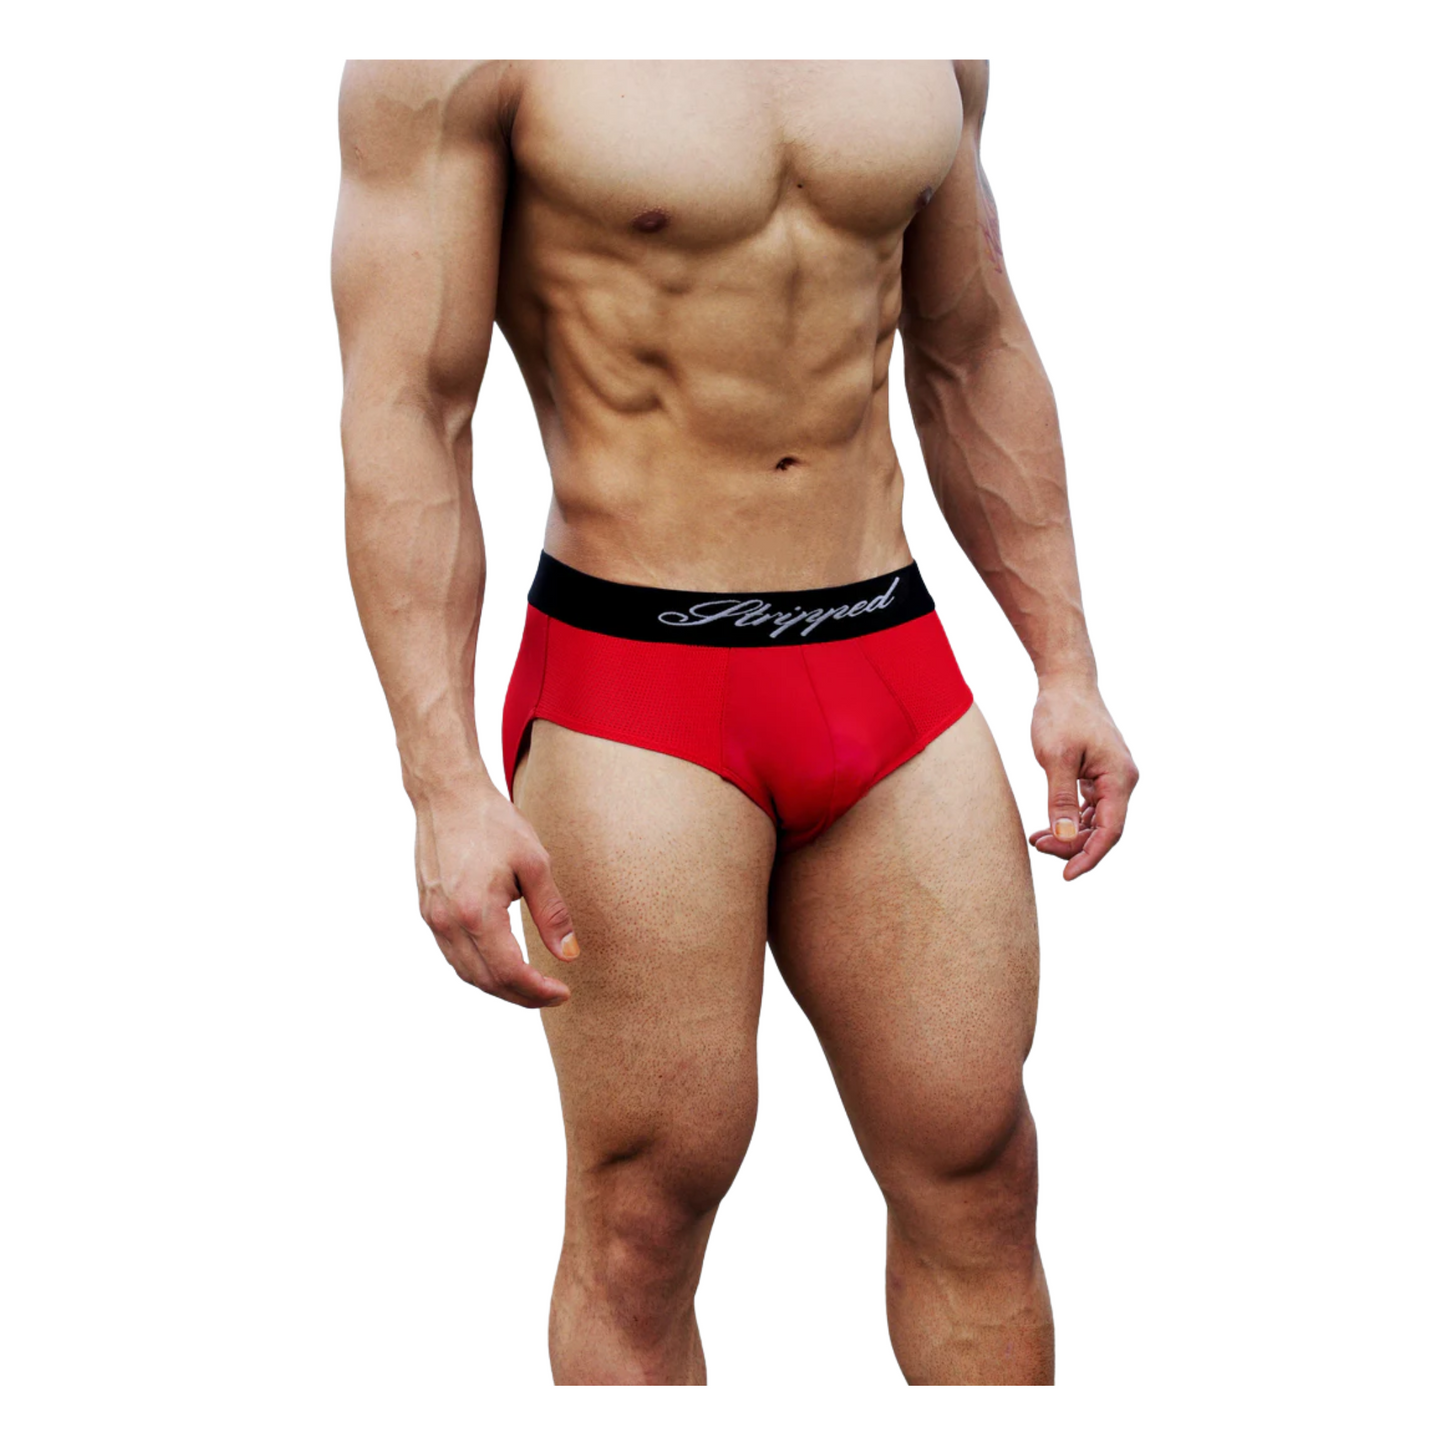 Red Brief - Body: By Stripped